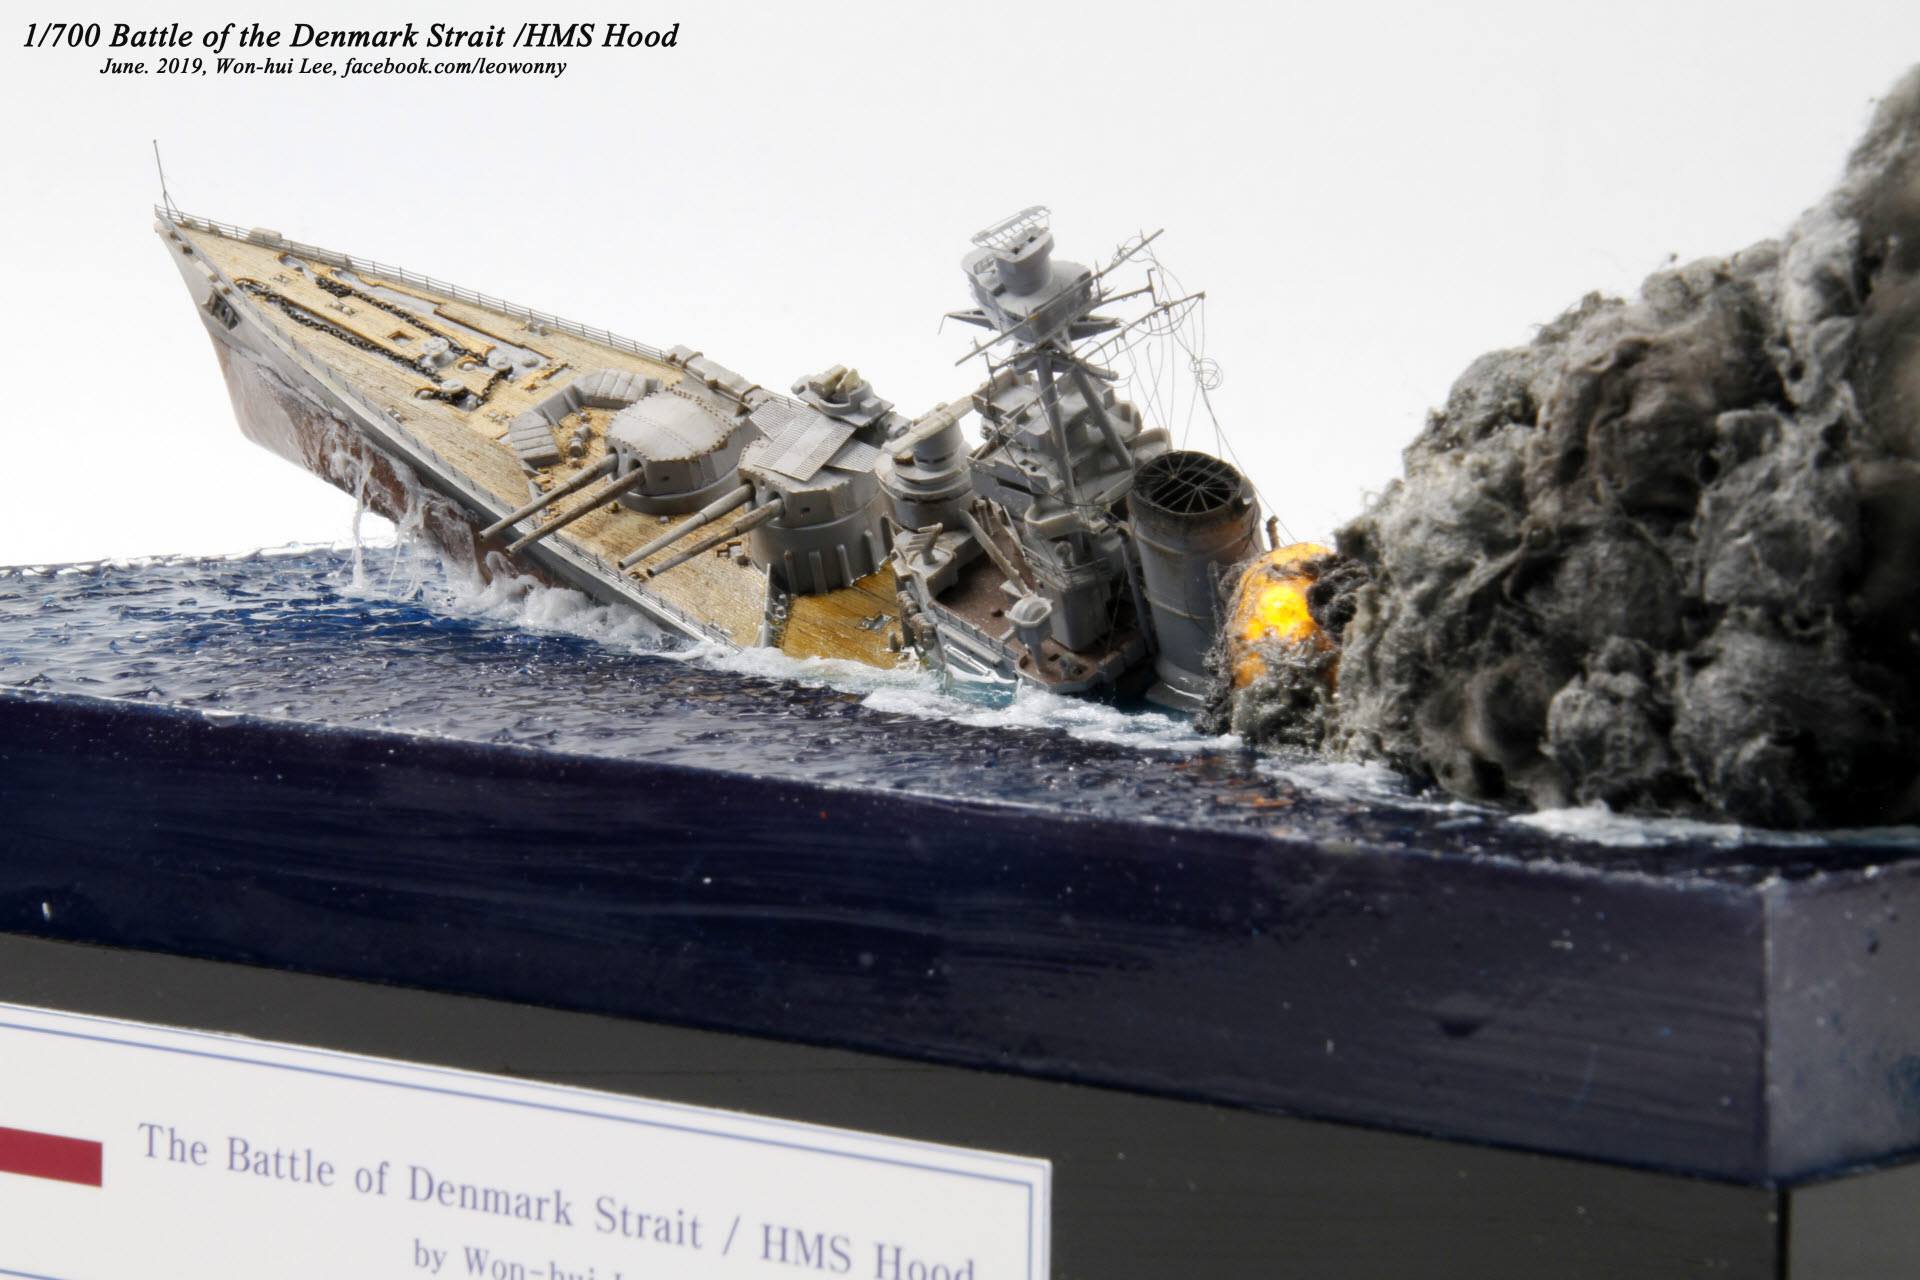 Hms hood wreck pictures